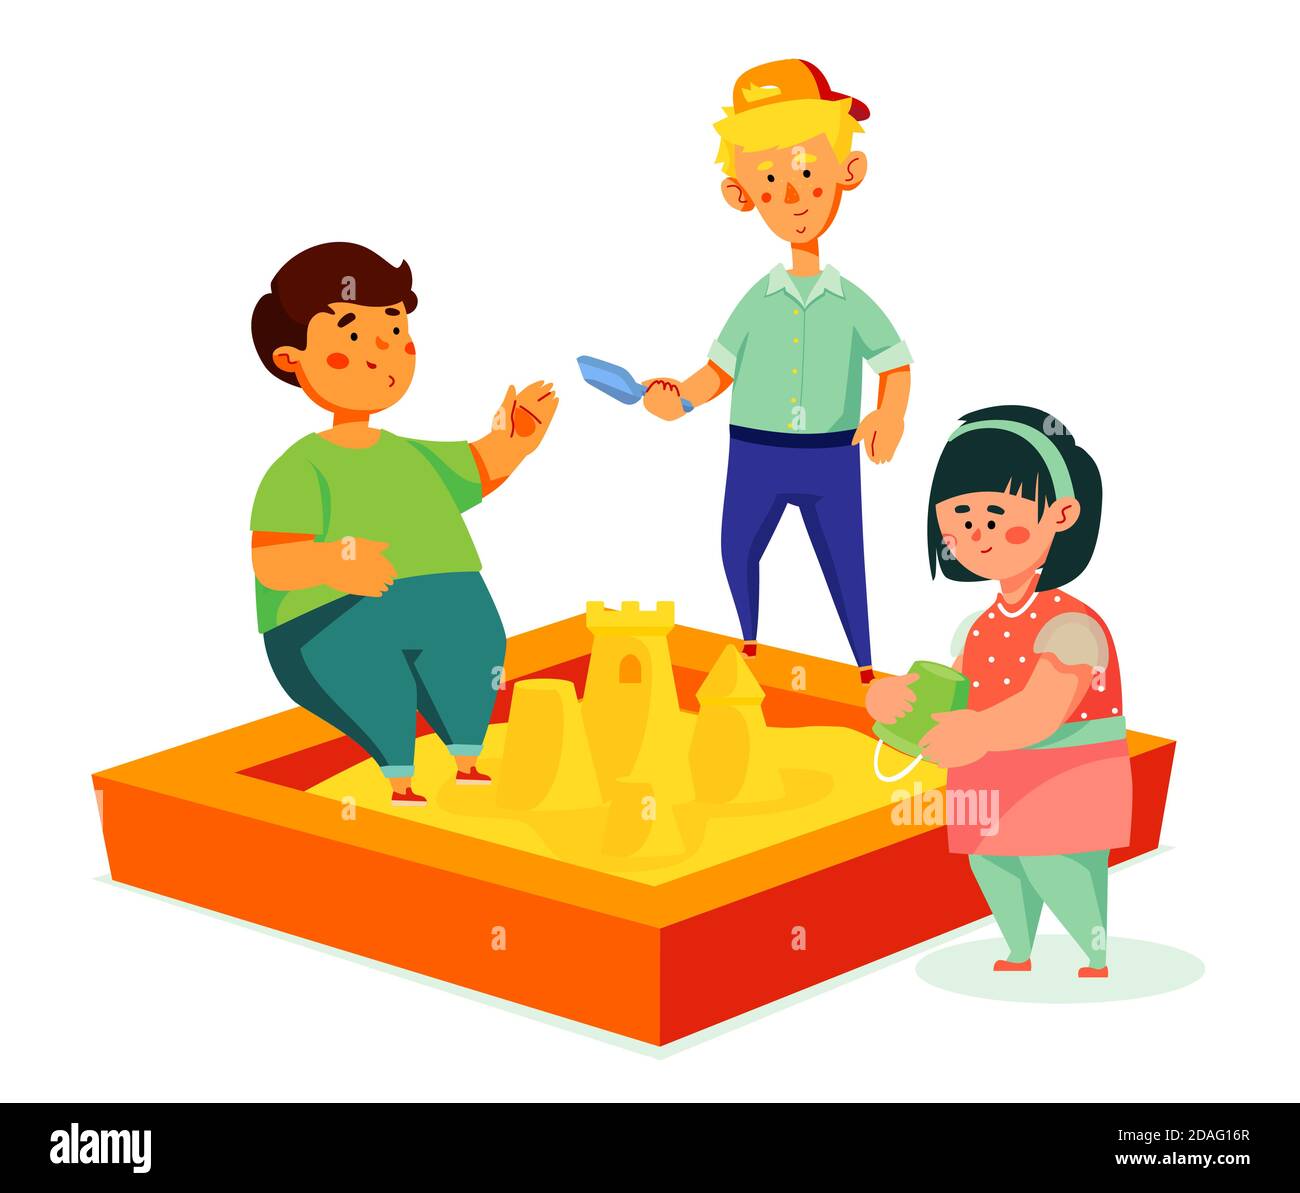 Children playing in the sandbox - colorful flat design style illustration Stock Vector